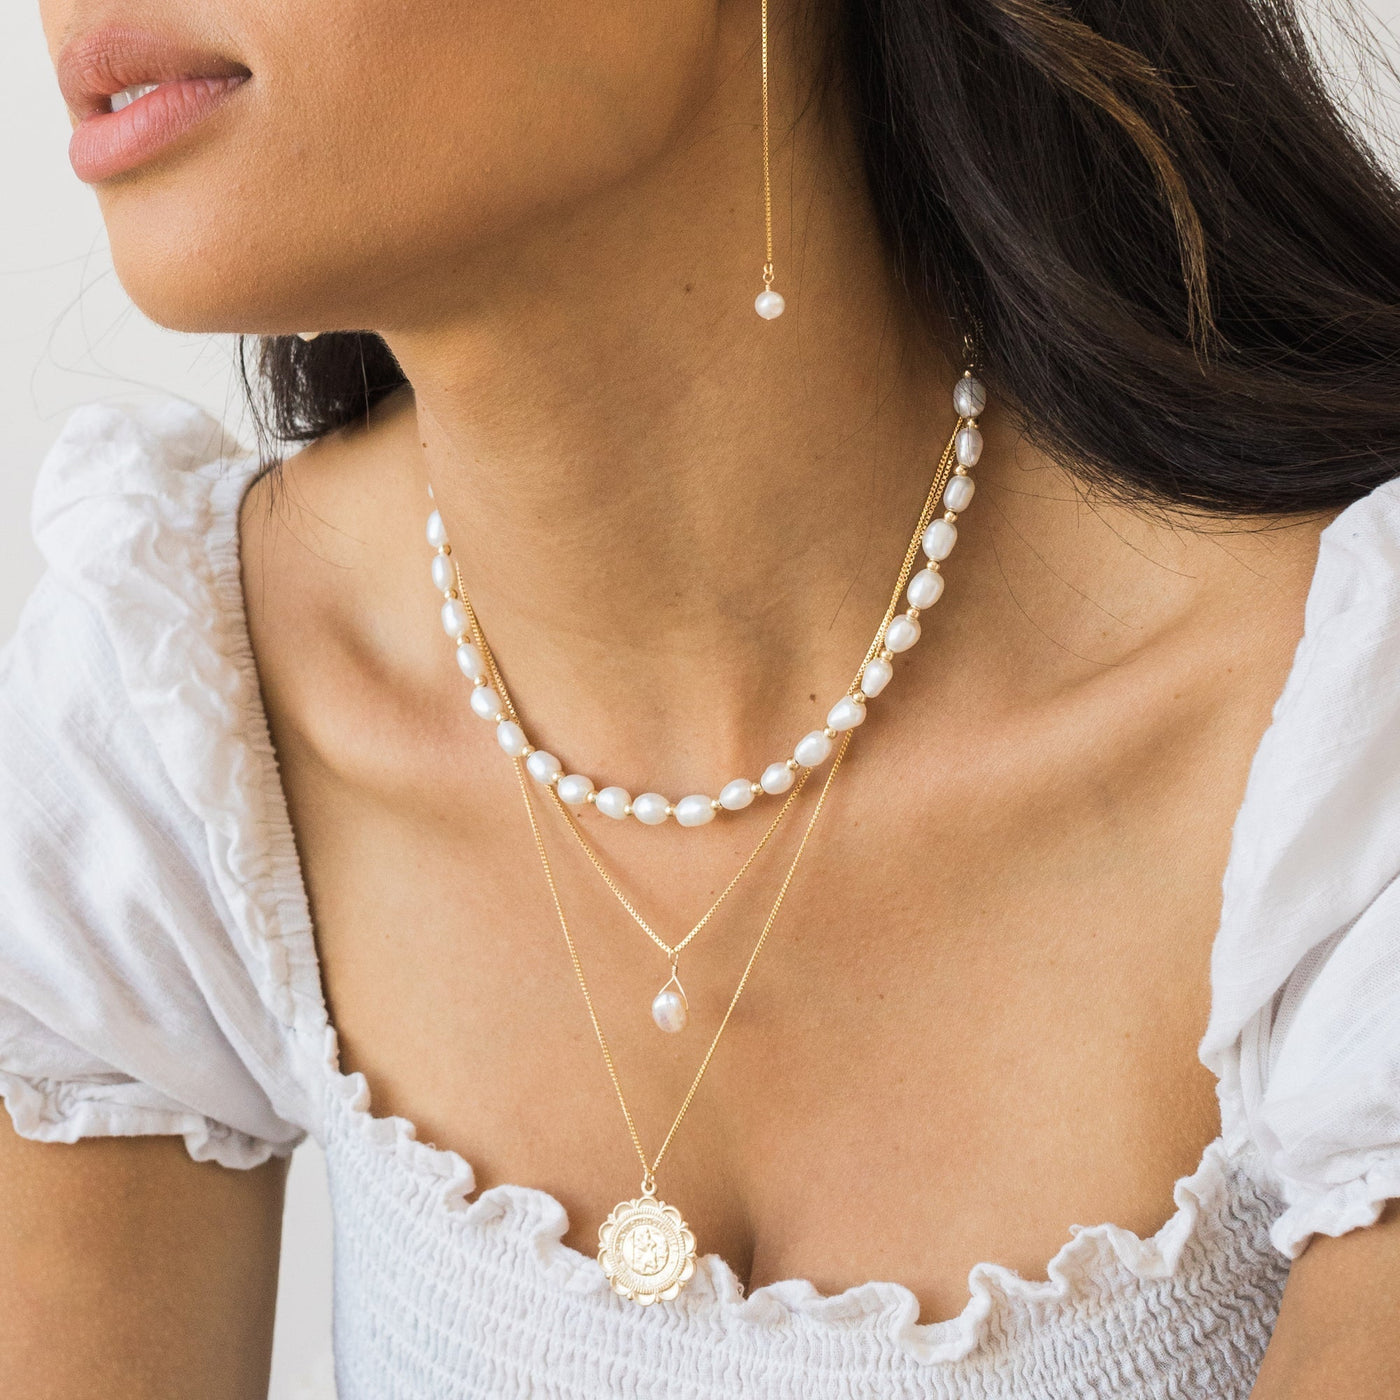 Traveler's Coin Necklace | Simple & Dainty Jewelry